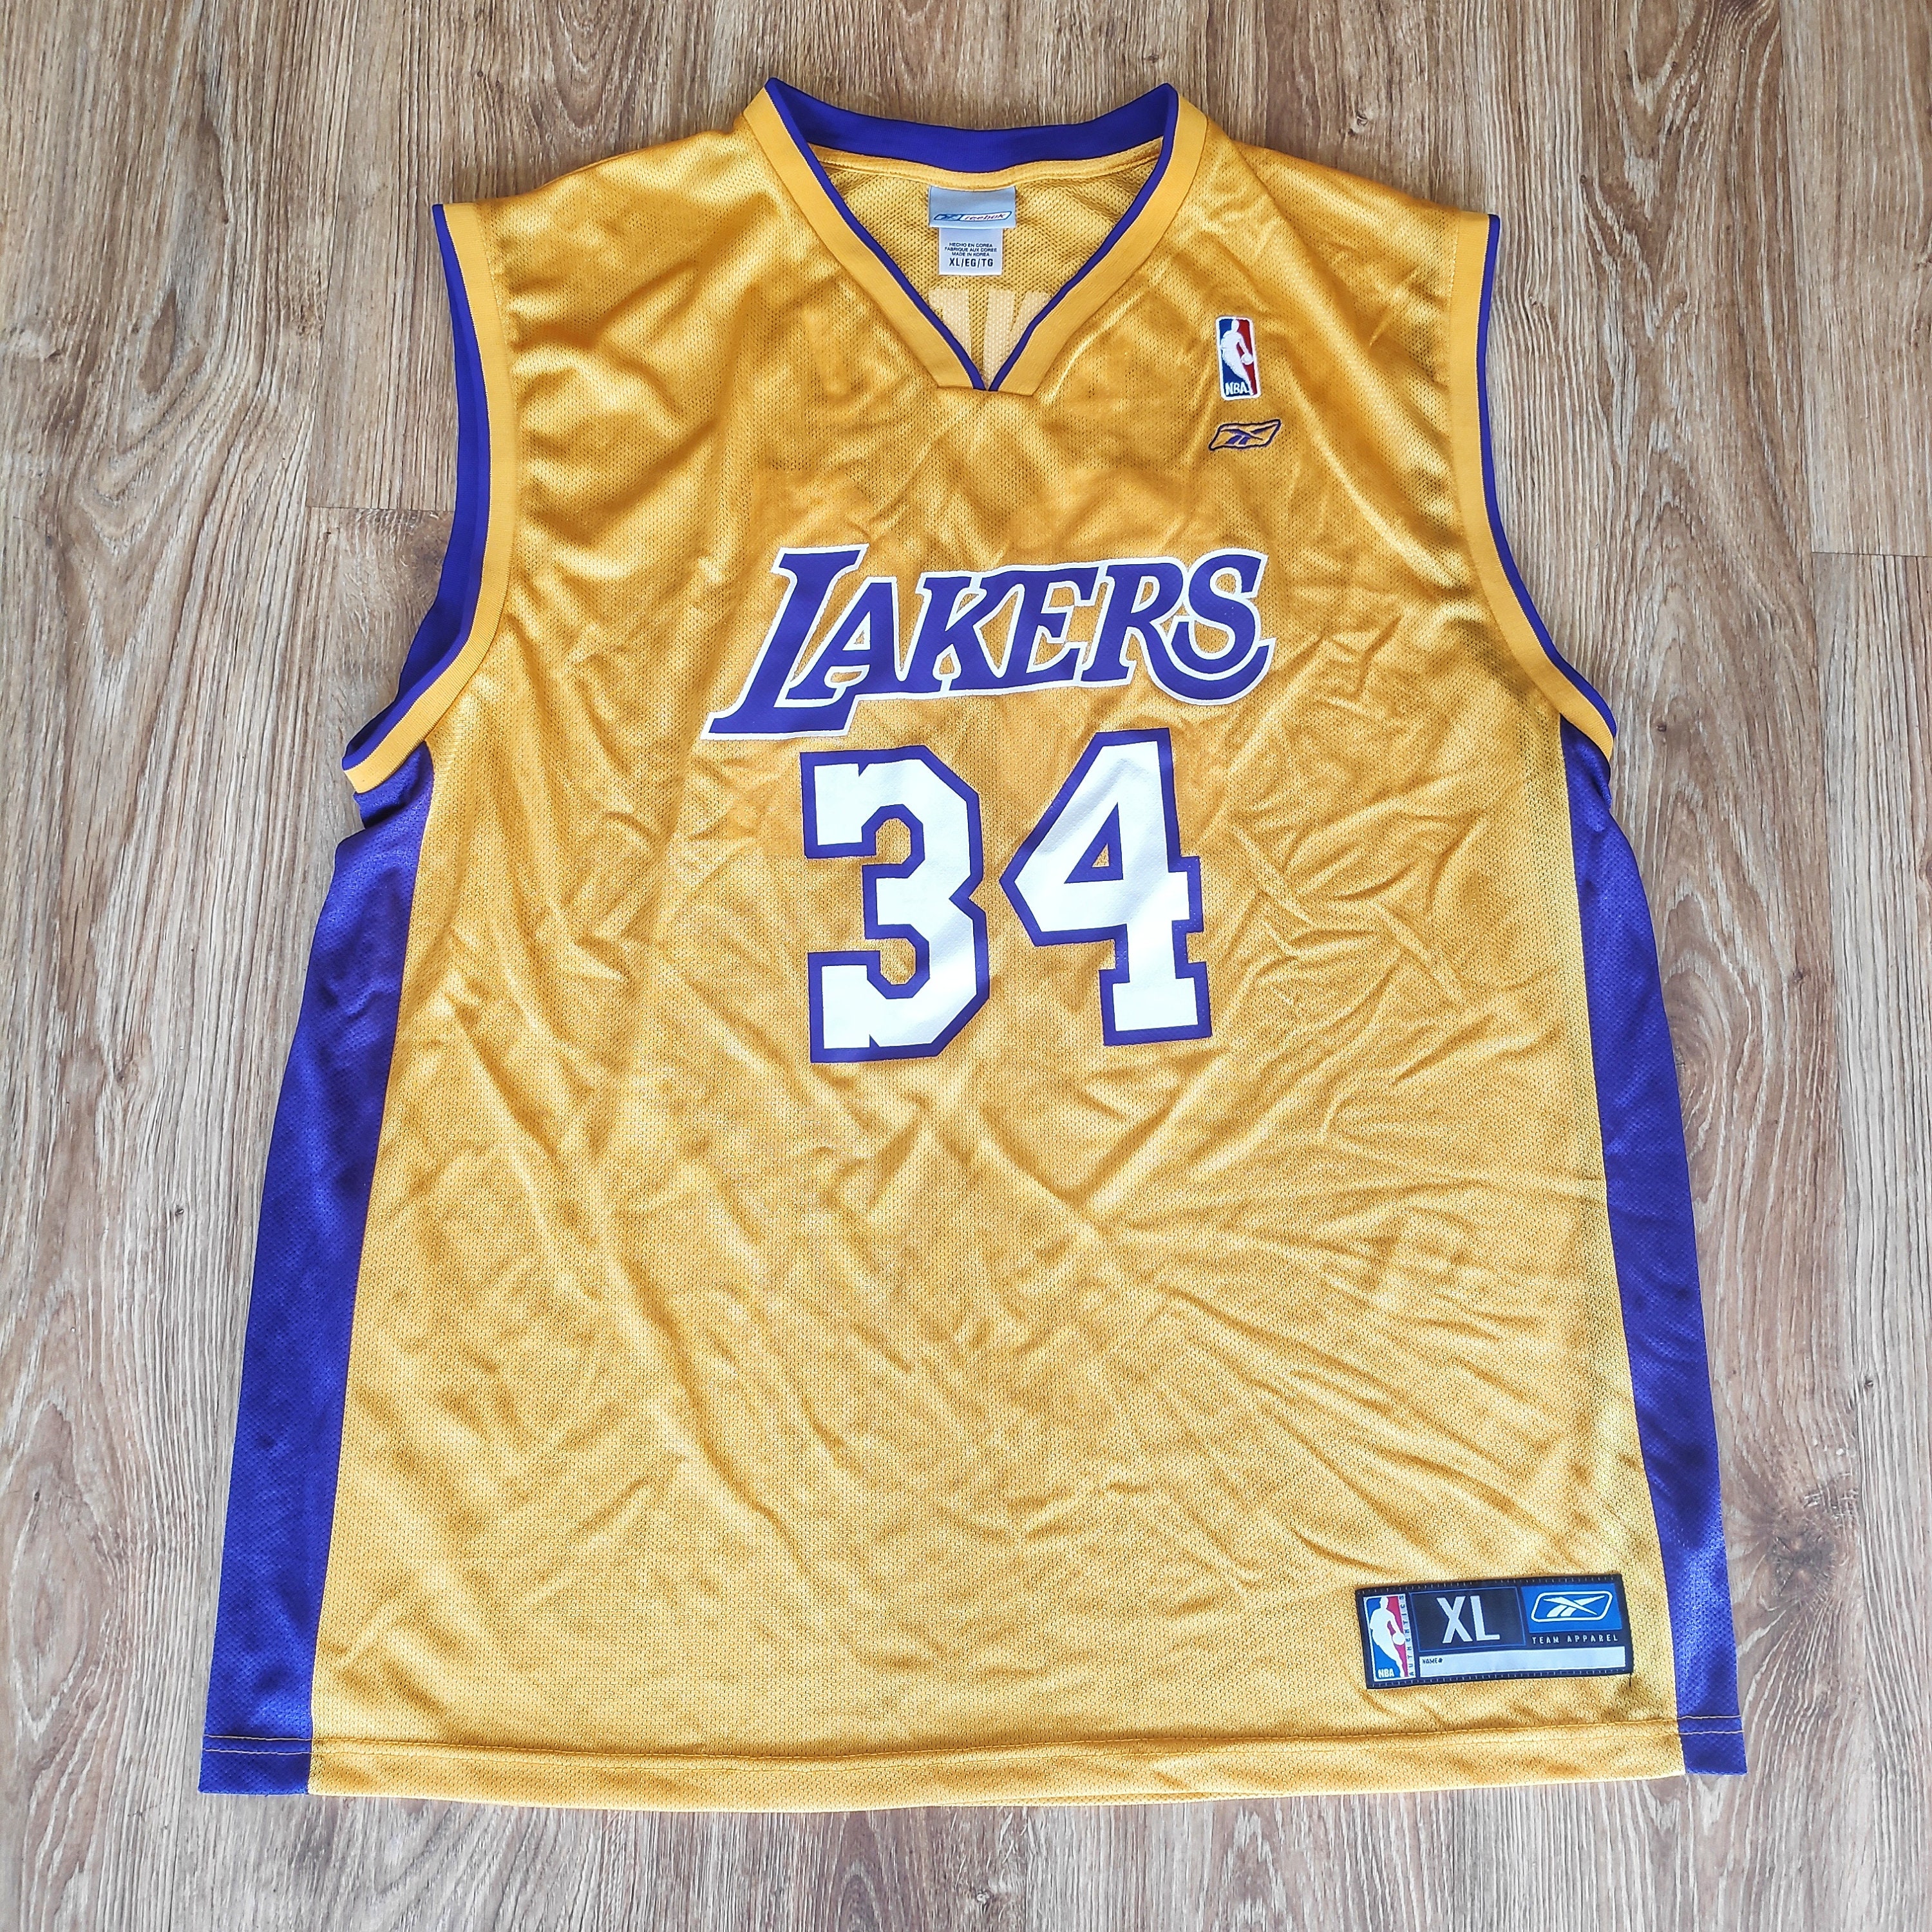 Authentic Shaquille O'Neal Los Angeles Lakers 1996-97 Shooting Shirt